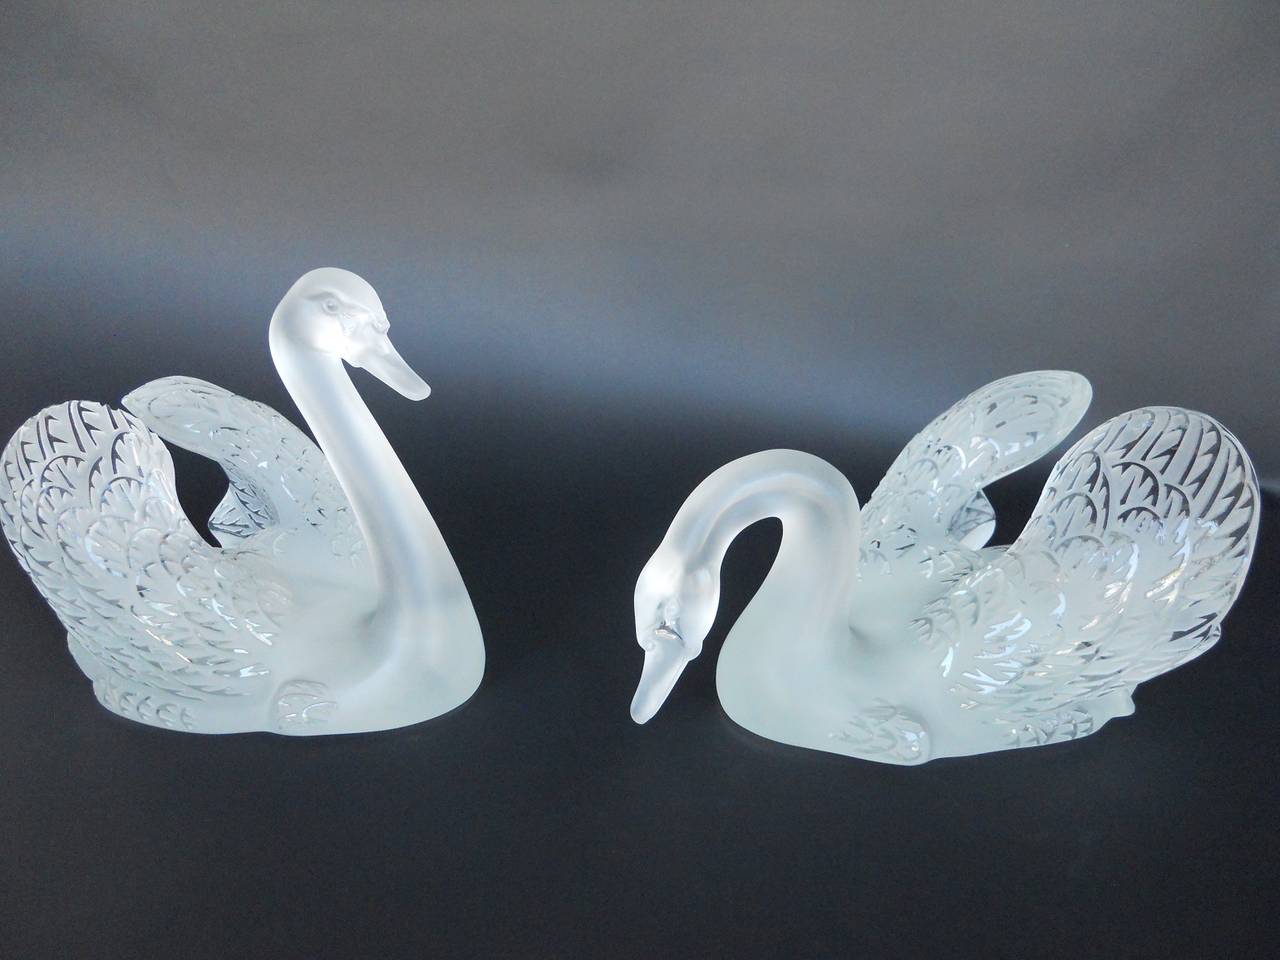 Lalique swan head up and swan head down sculptures.
Handcrafted in France.
Dimensions (Head Down Swan): H 7.09